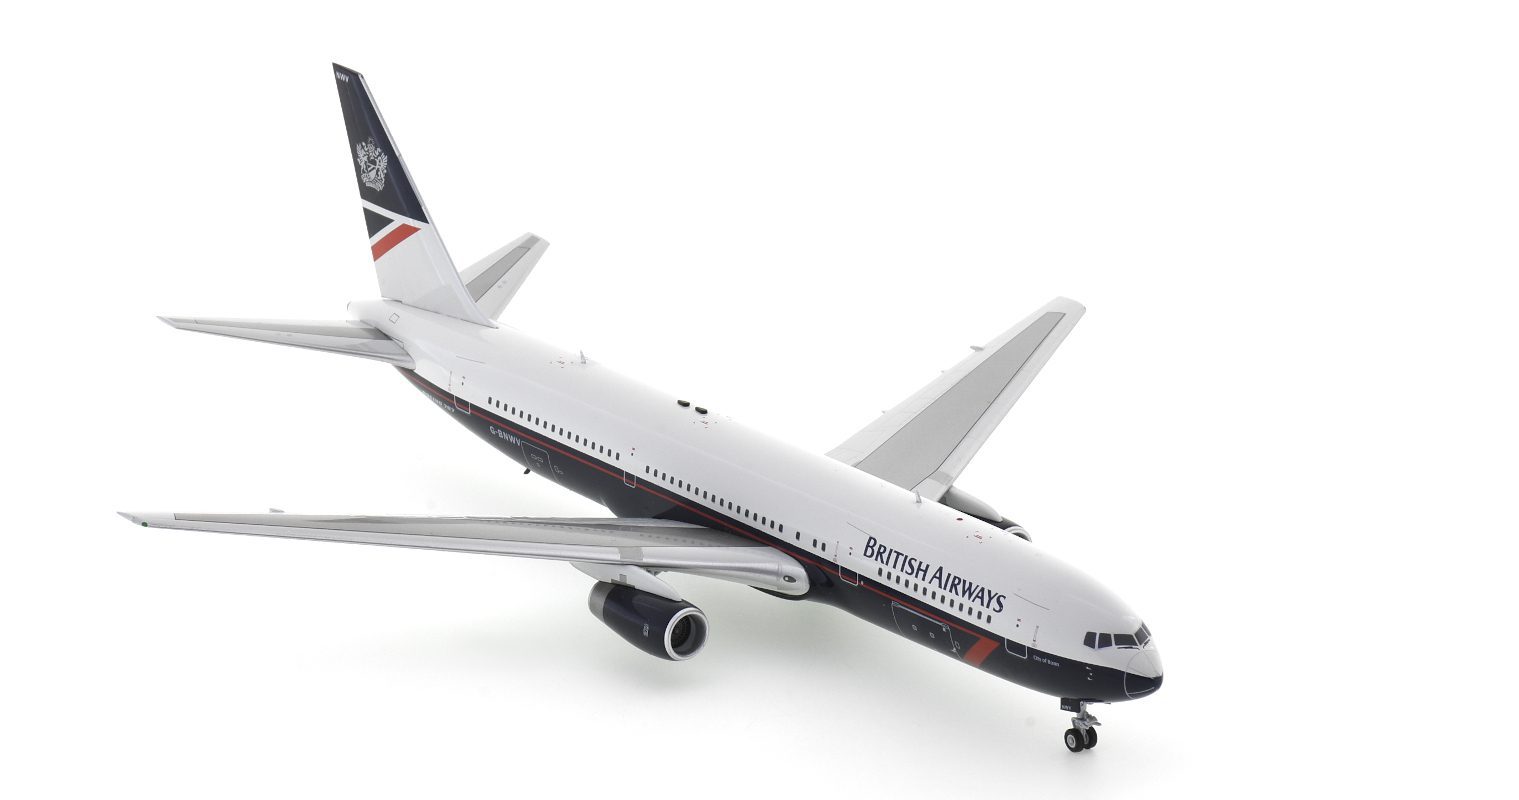 Front starboard side view of the Boeing 767-300ER  1/200 scale diecast model registration G-BNWV in British Airway's livery, circa the late 1990s - ARDBA11 